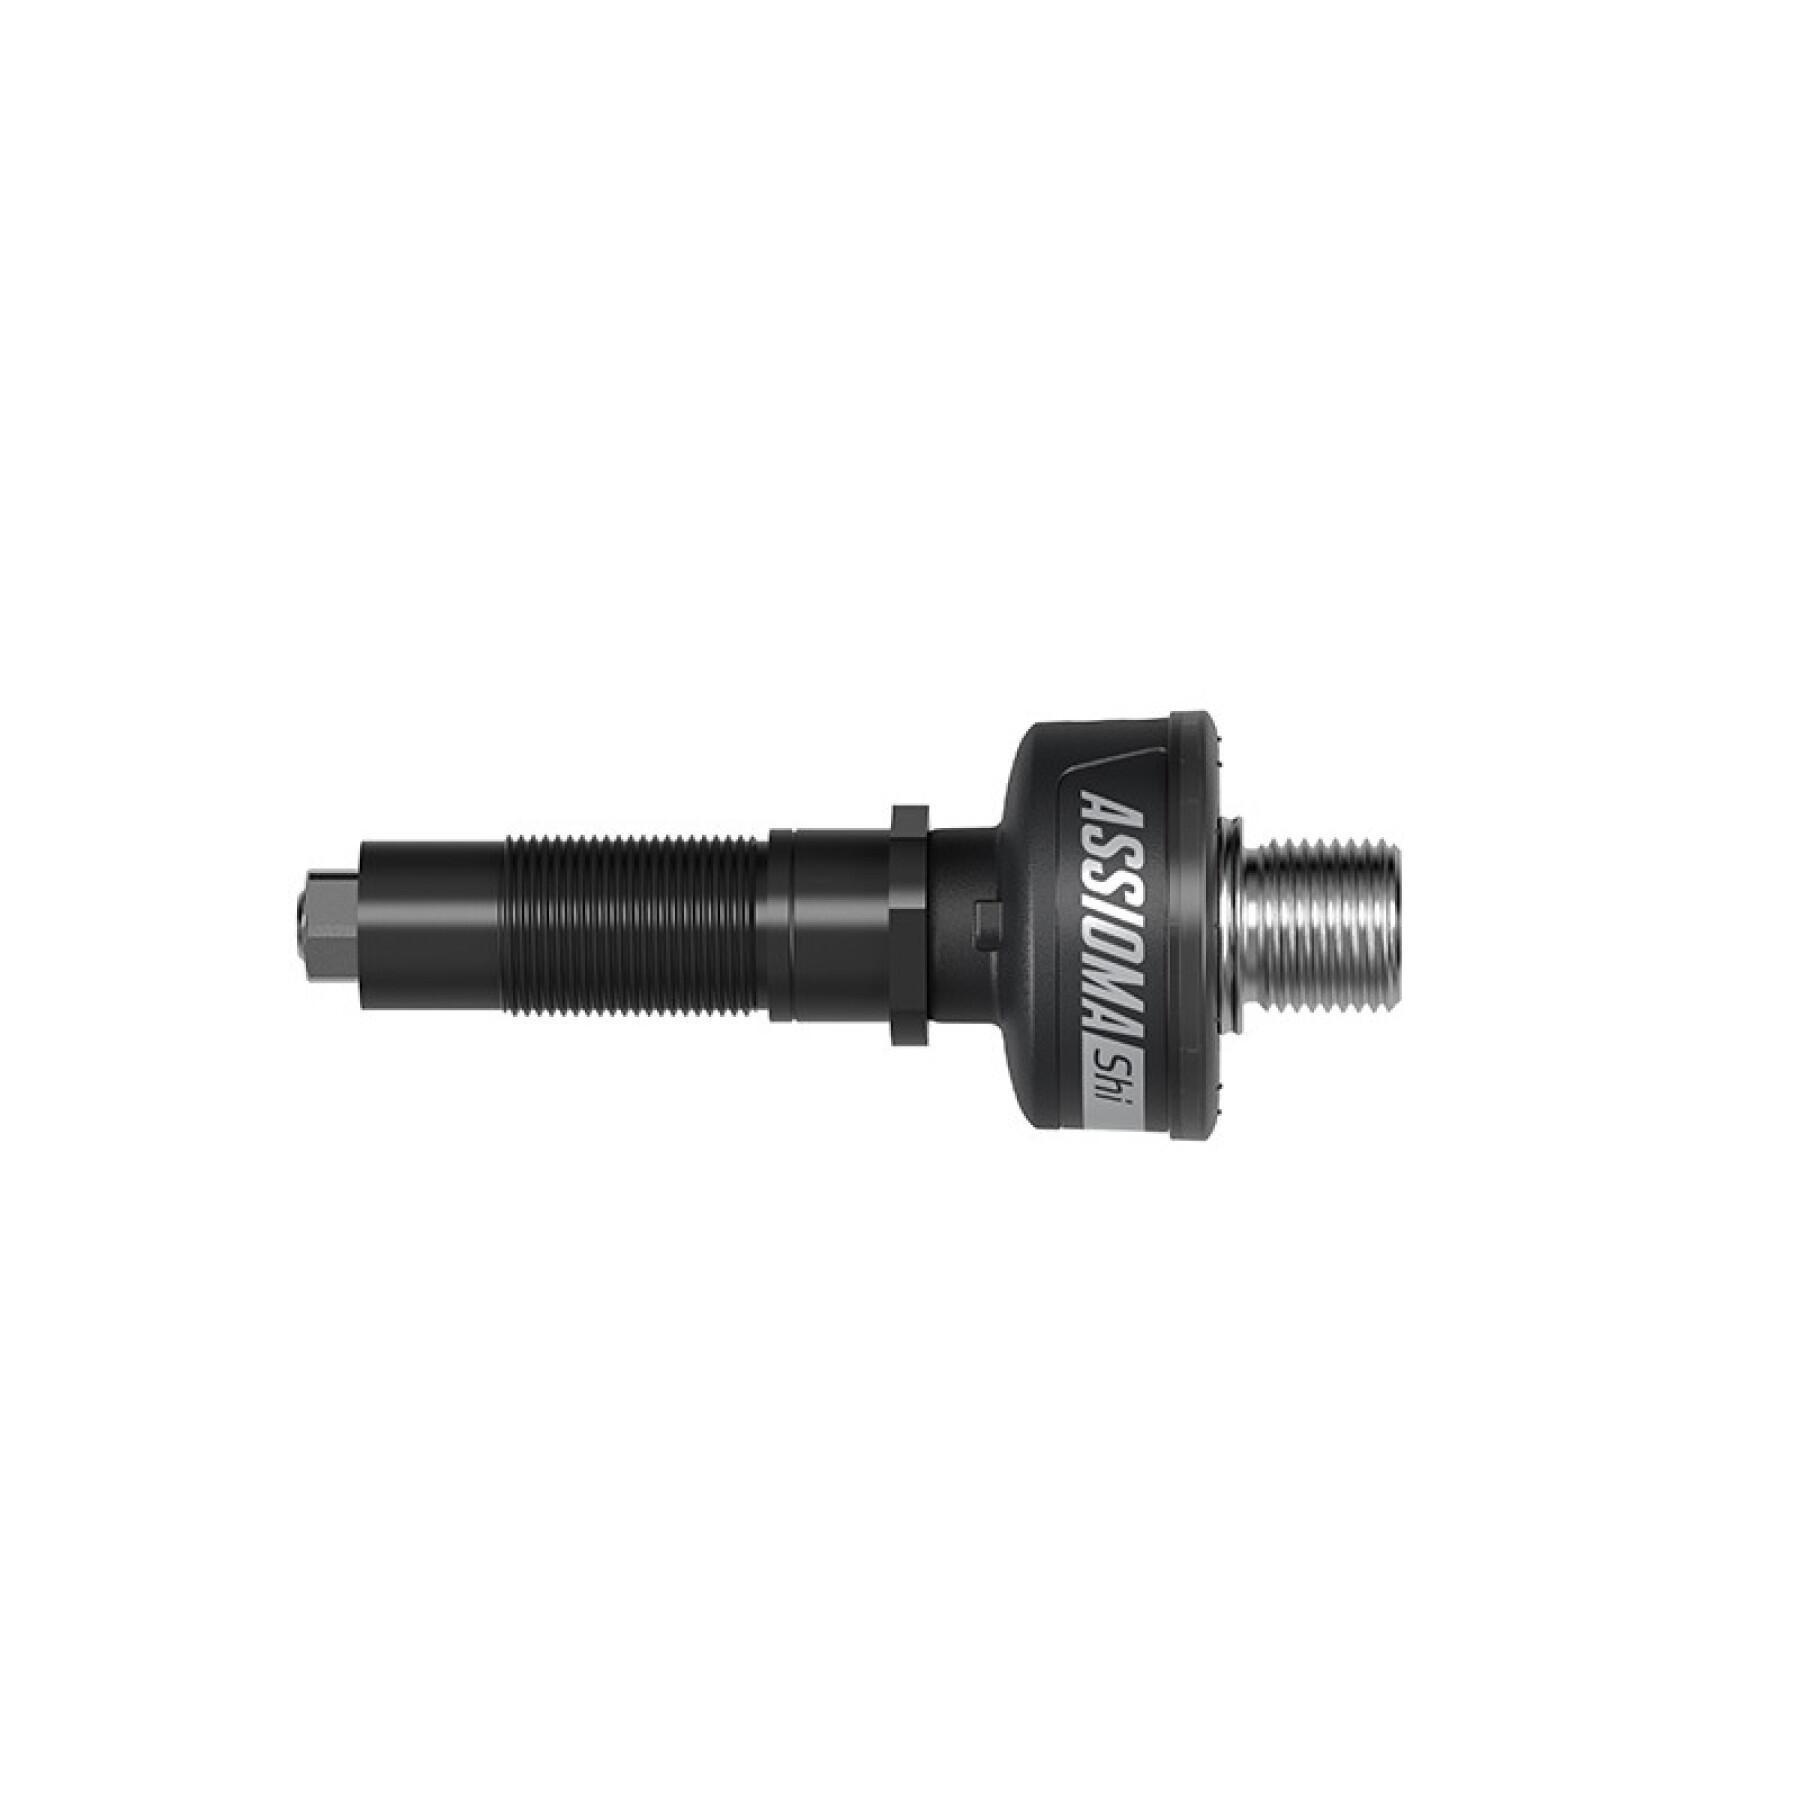 Axle with sensor for the left pedal for assioma uno/duo Favero